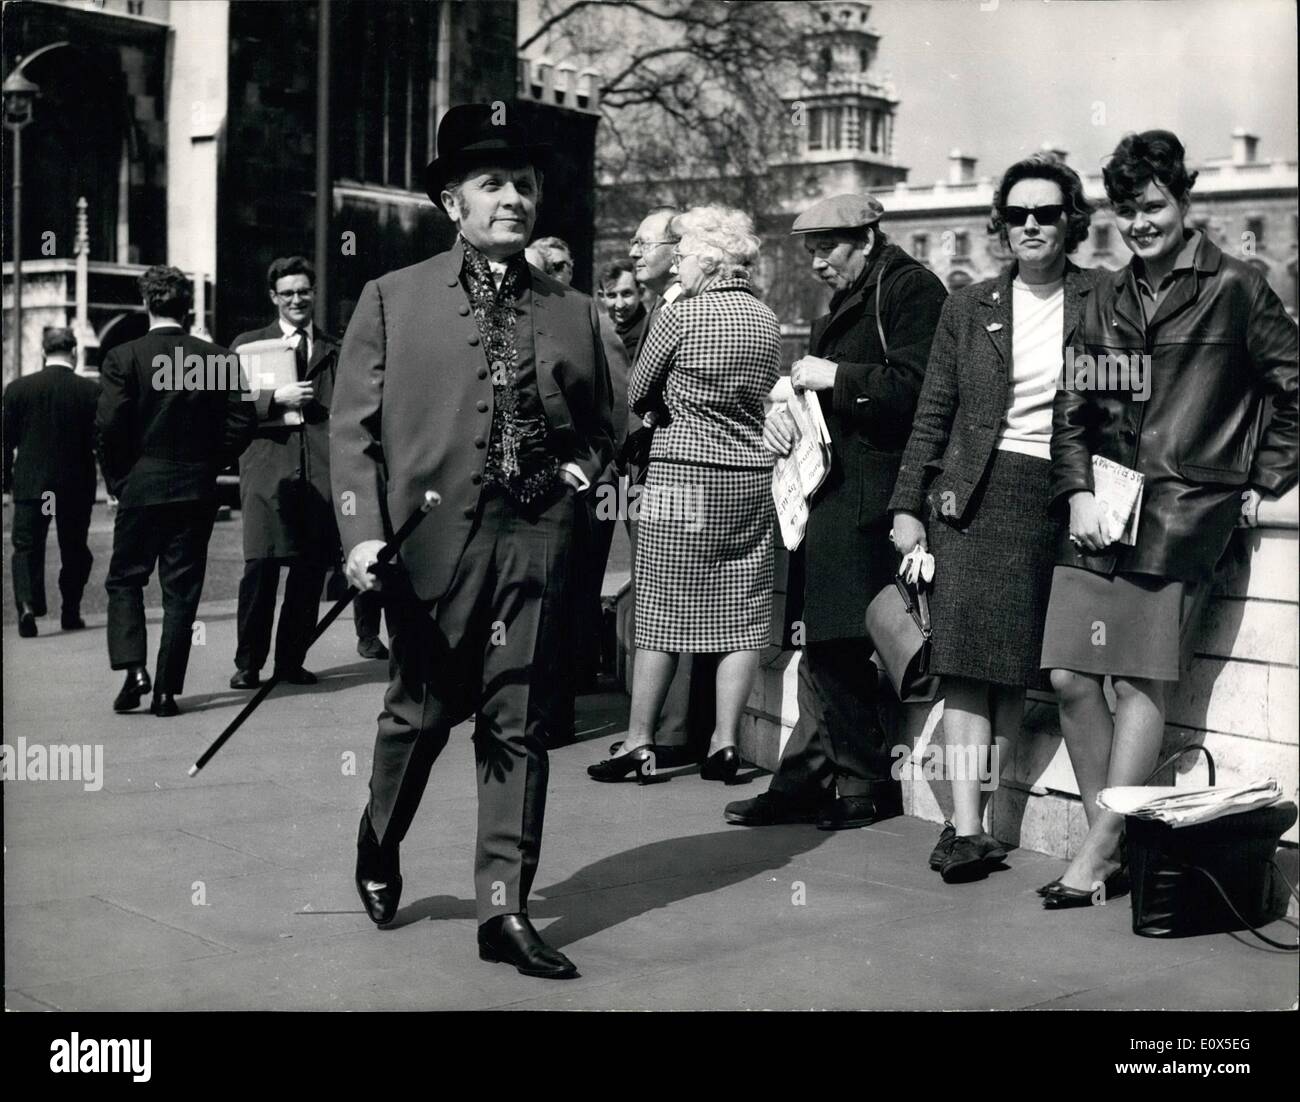 Jun. 06, 1965 - Mr. Abse turns up for the budget in his Hot Suit . Mr. Leo Abse, the Labour M.P. for Pontypool turned up at the House of Commons today for the Budget wearing a curry-coloured suit with a strong 18th Century influence including a waistcoat of the period. This outfit was topped by a very special hat which he had imported from Paris. Mr. Abse makes a point of being strikingly dressed for all Parliamentary occasions. Keystone Photo Shows: Onlooker watch as Mr. Leo Abse walks past on way to the House of Commons this afternoon in his Hot Suit for the budget. Stock Photo